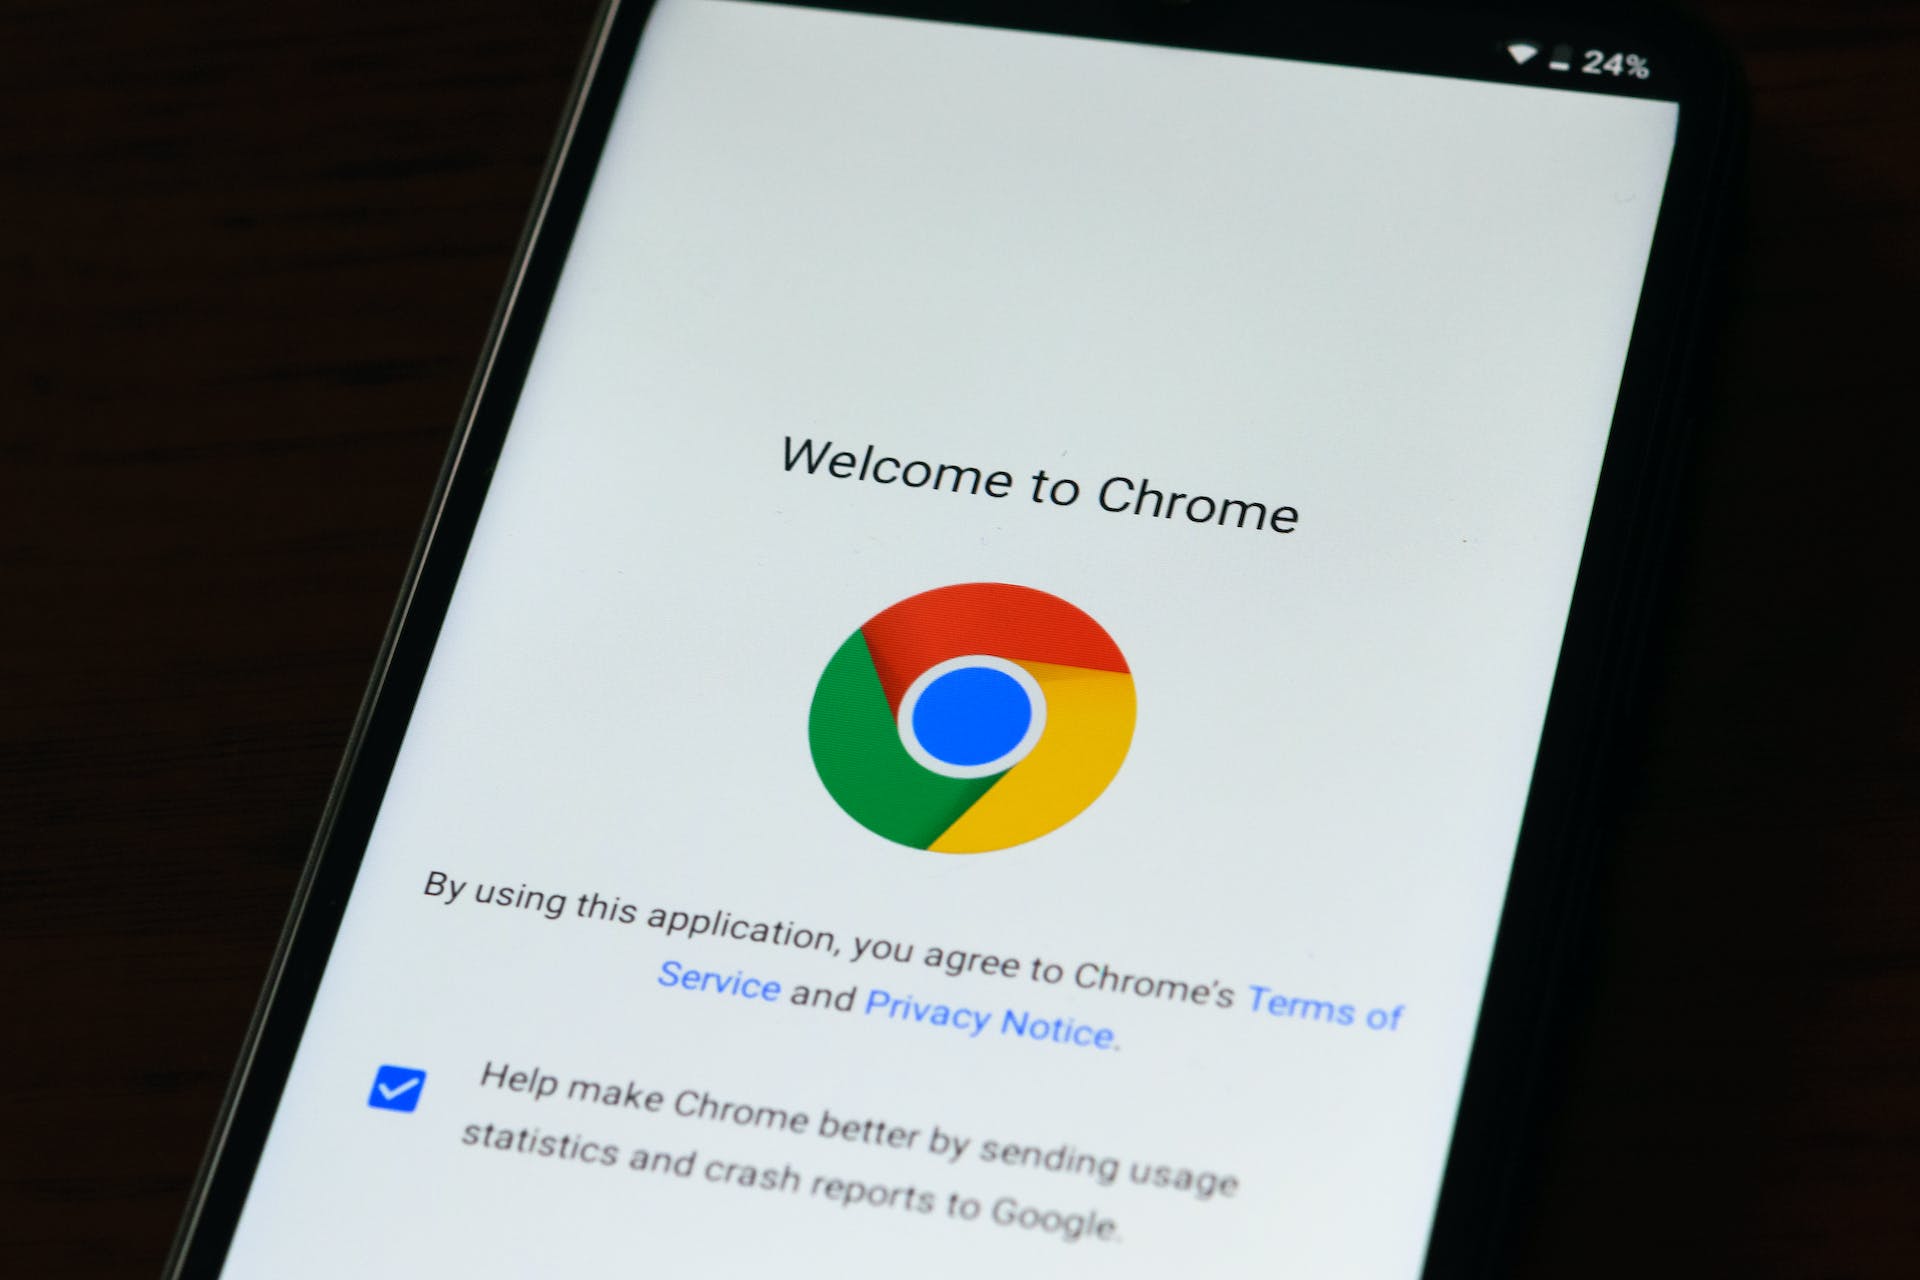 10 Hidden Chrome Features You Probably Didn't Know About